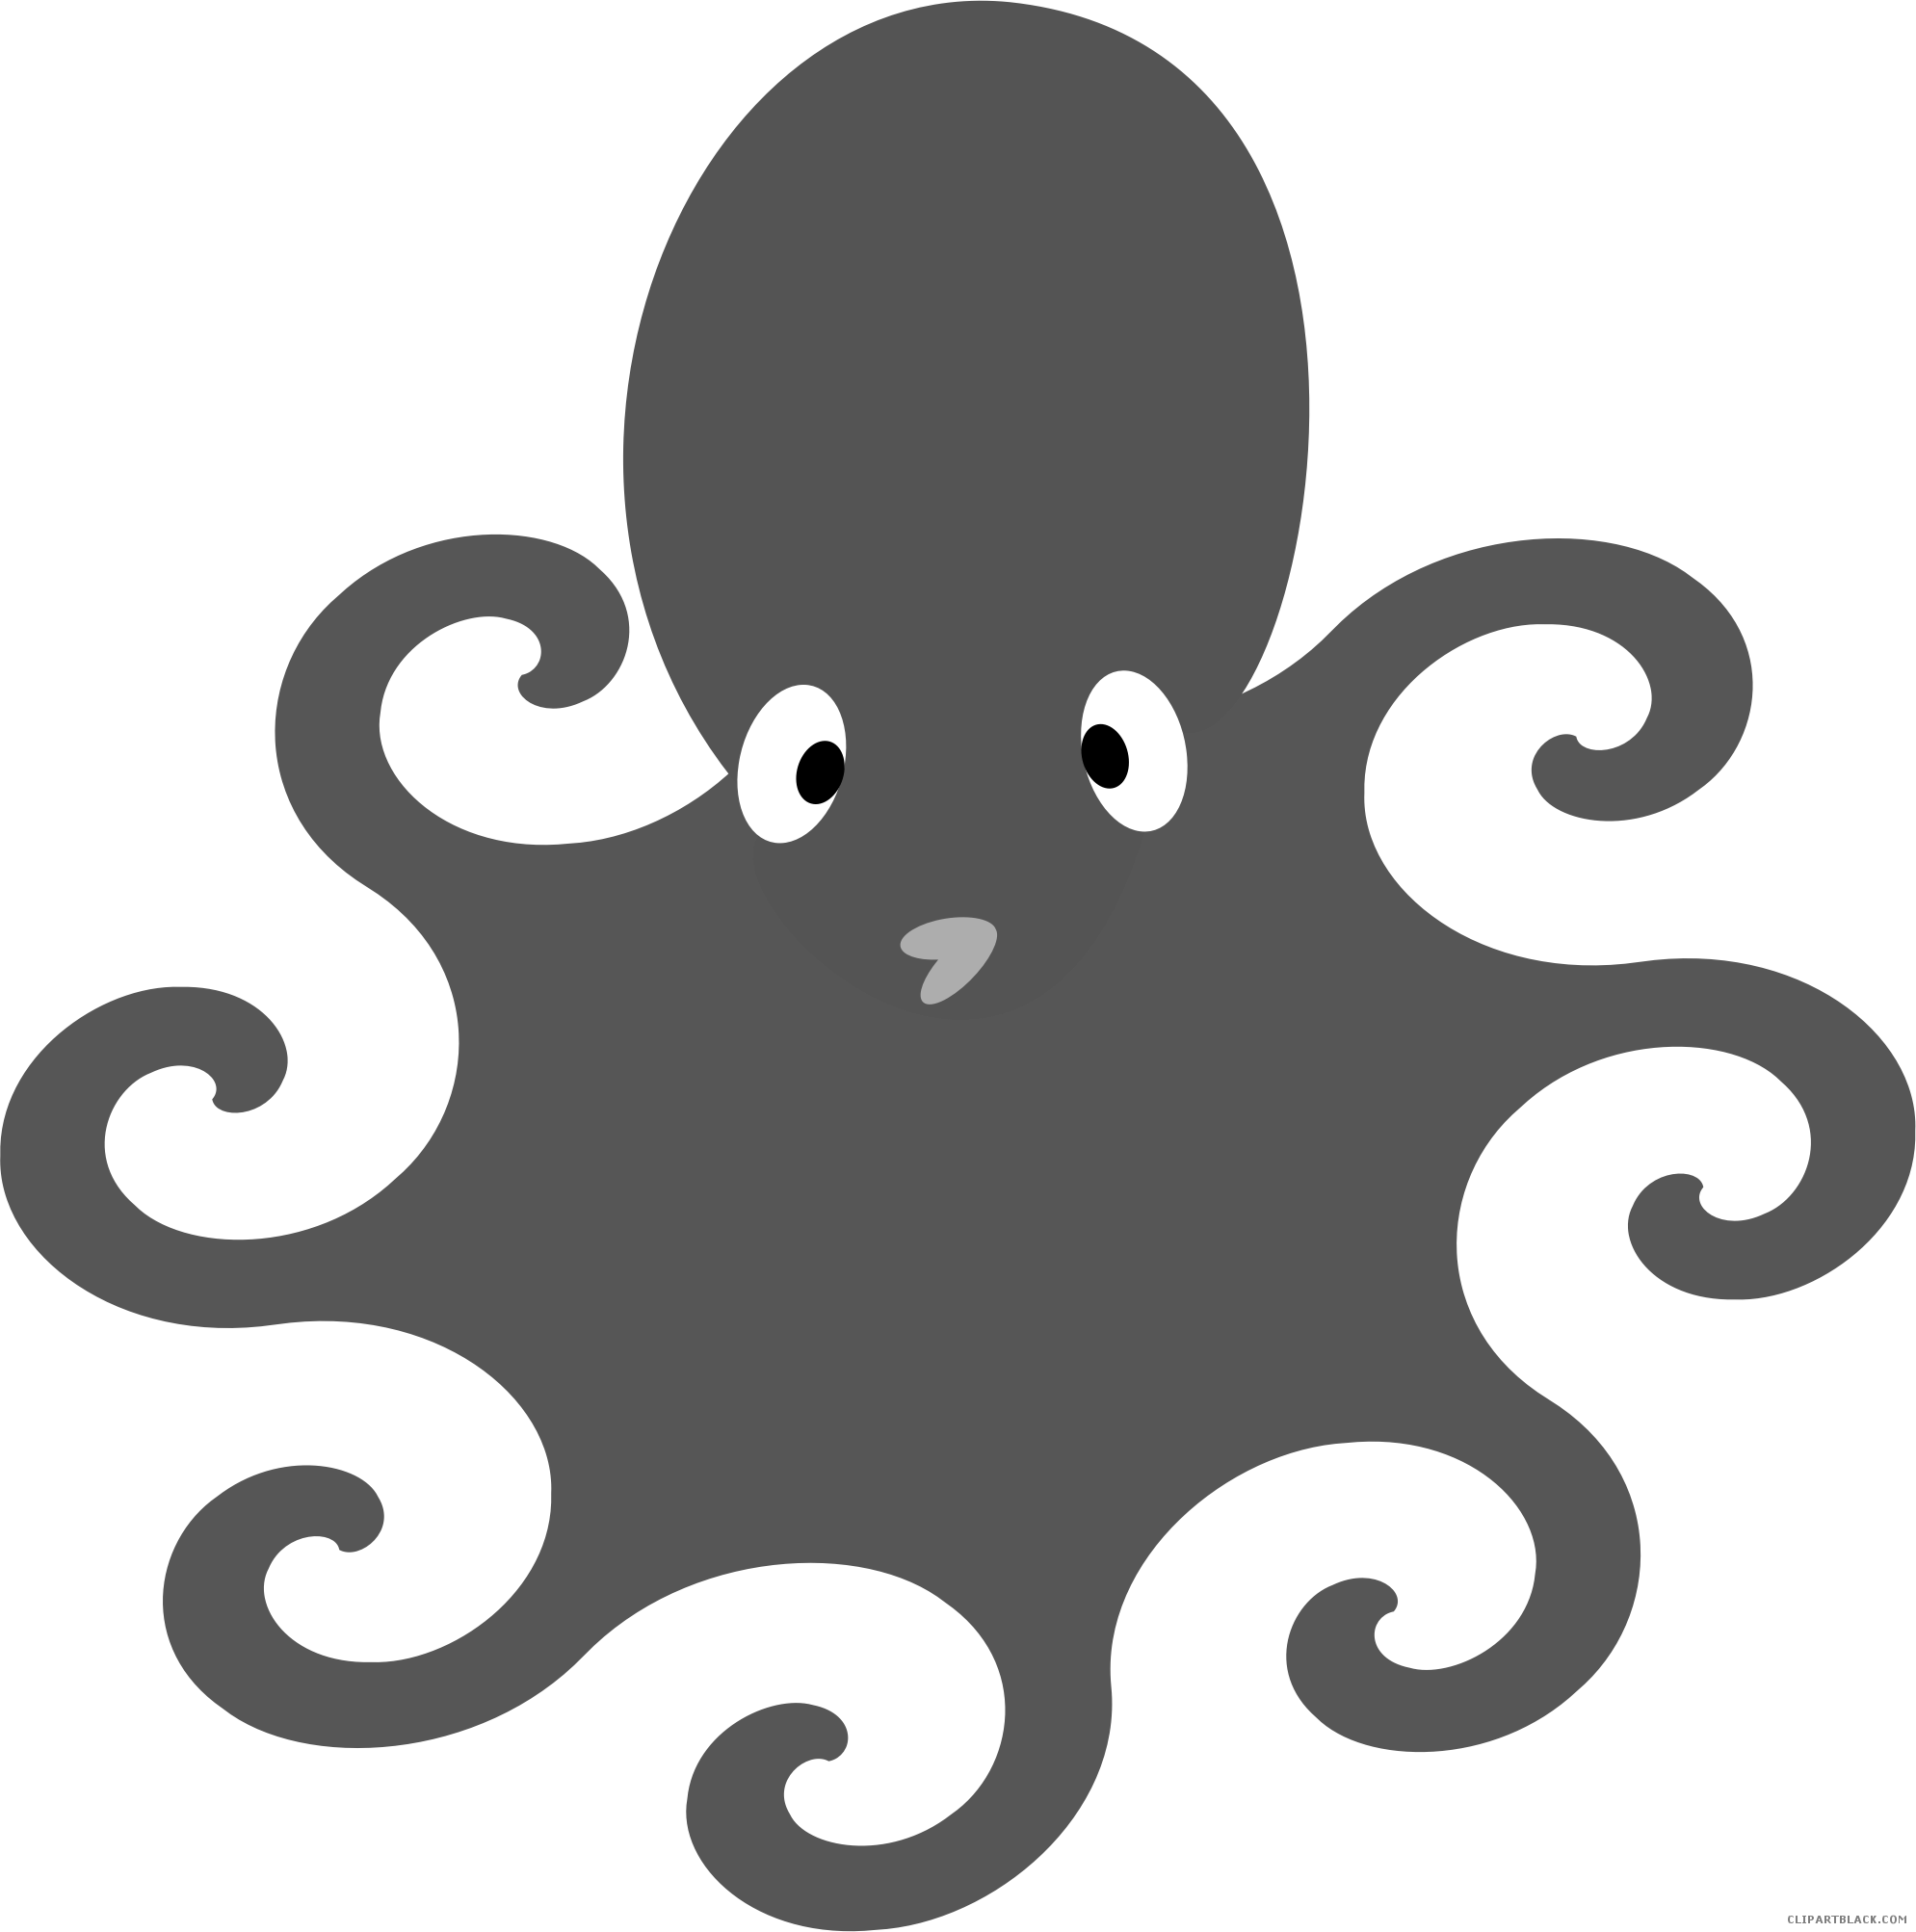 Octopus Animal Free Black White Clipart Images Clipartblack - Octopus (1989x2006)